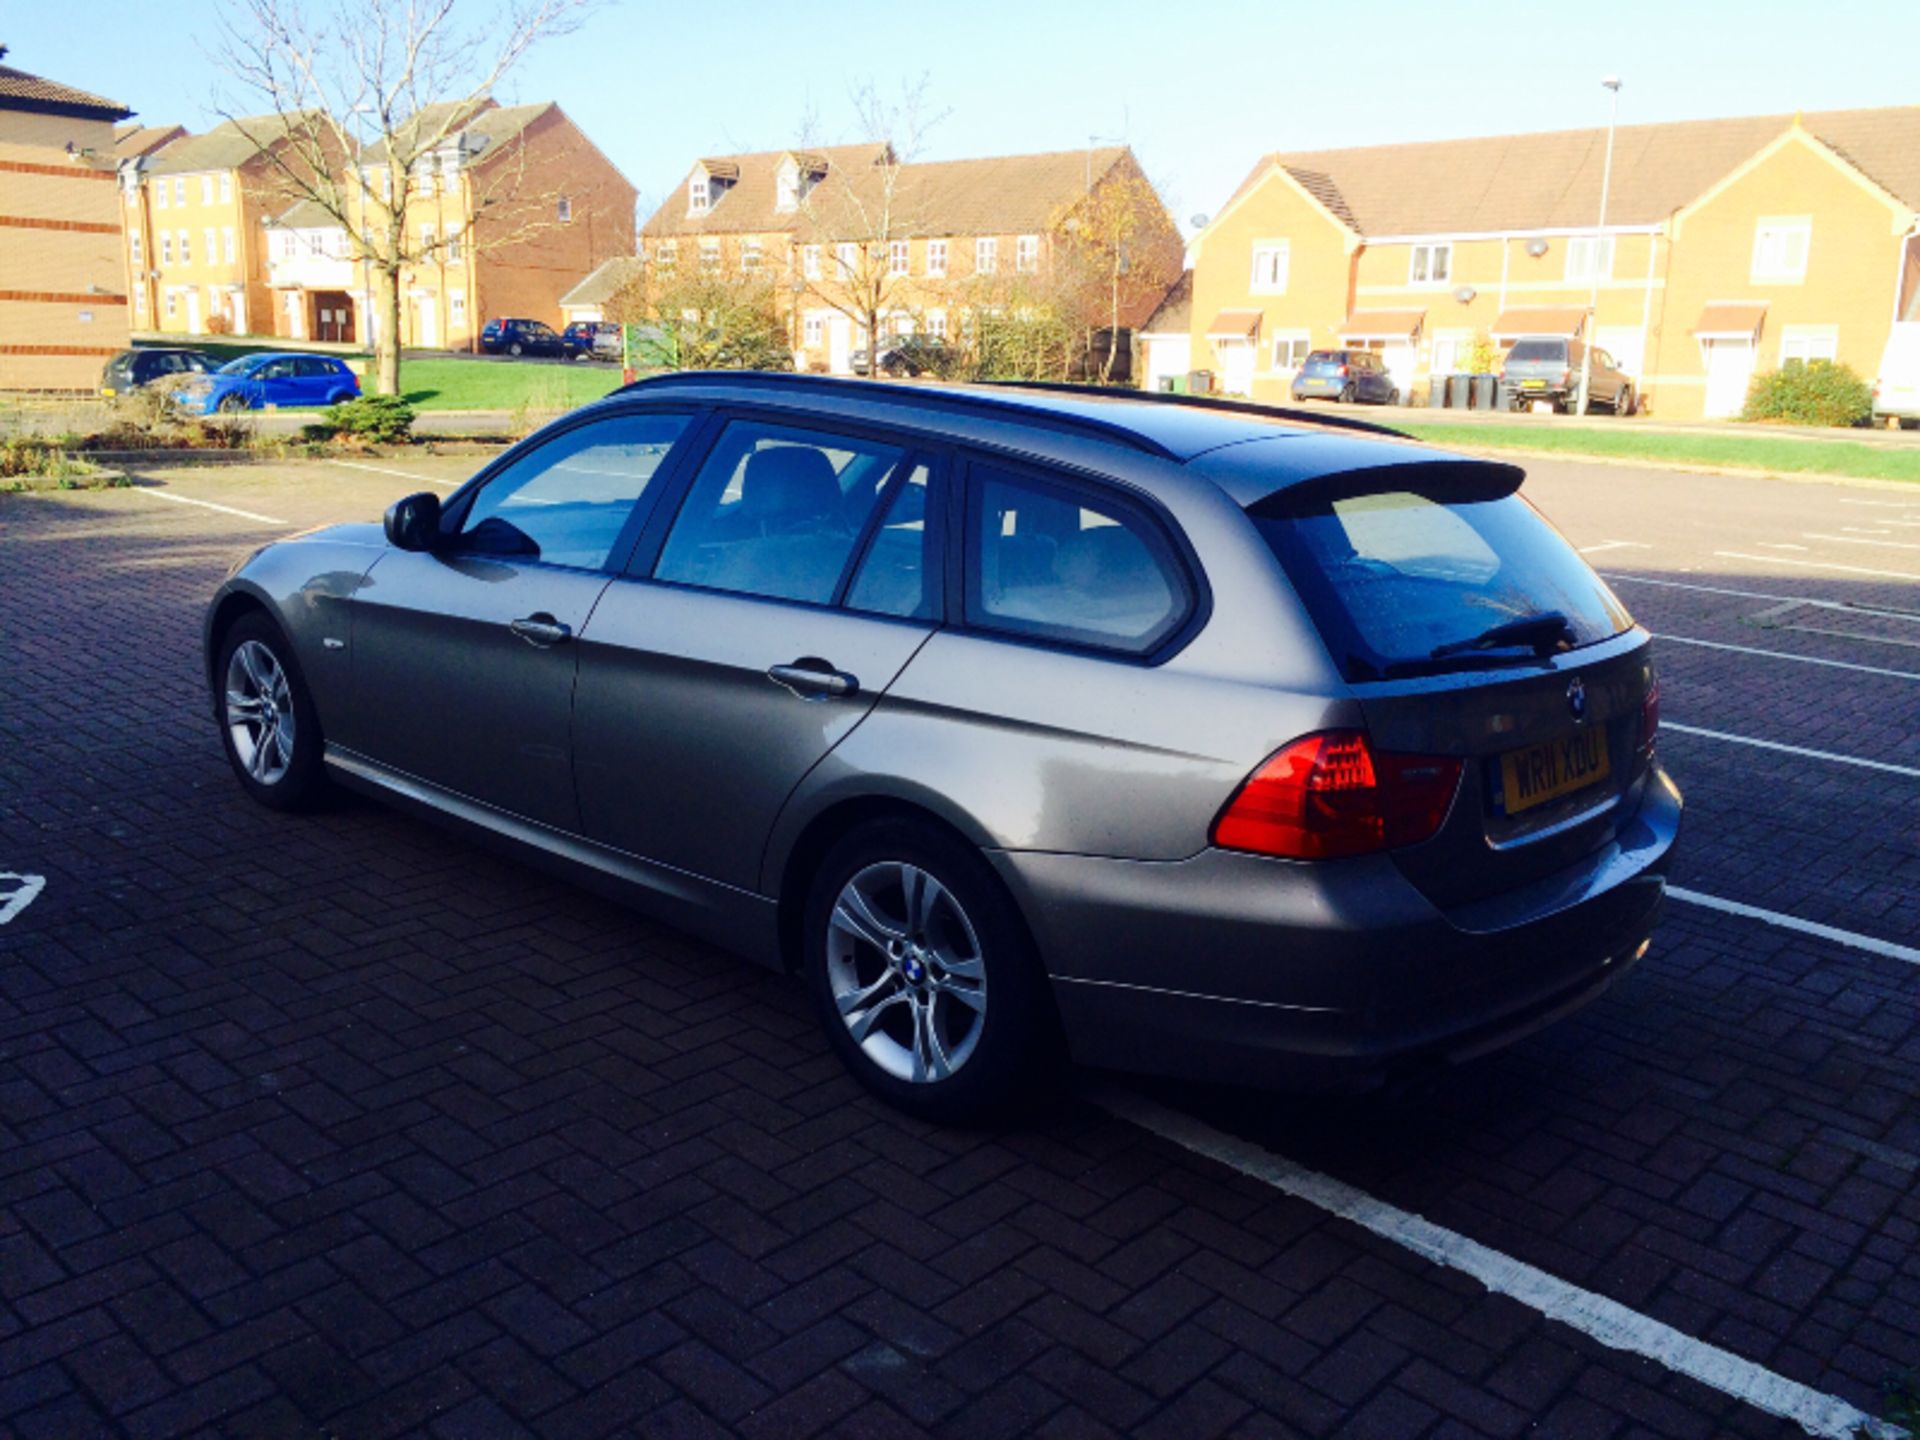 ON SALE ! BMW 318D DIESEL (2011 - 11 REG) 'SERVICE HISTORY BY BMW' START / STOP - AIR CON - EURO 5 - Image 5 of 15